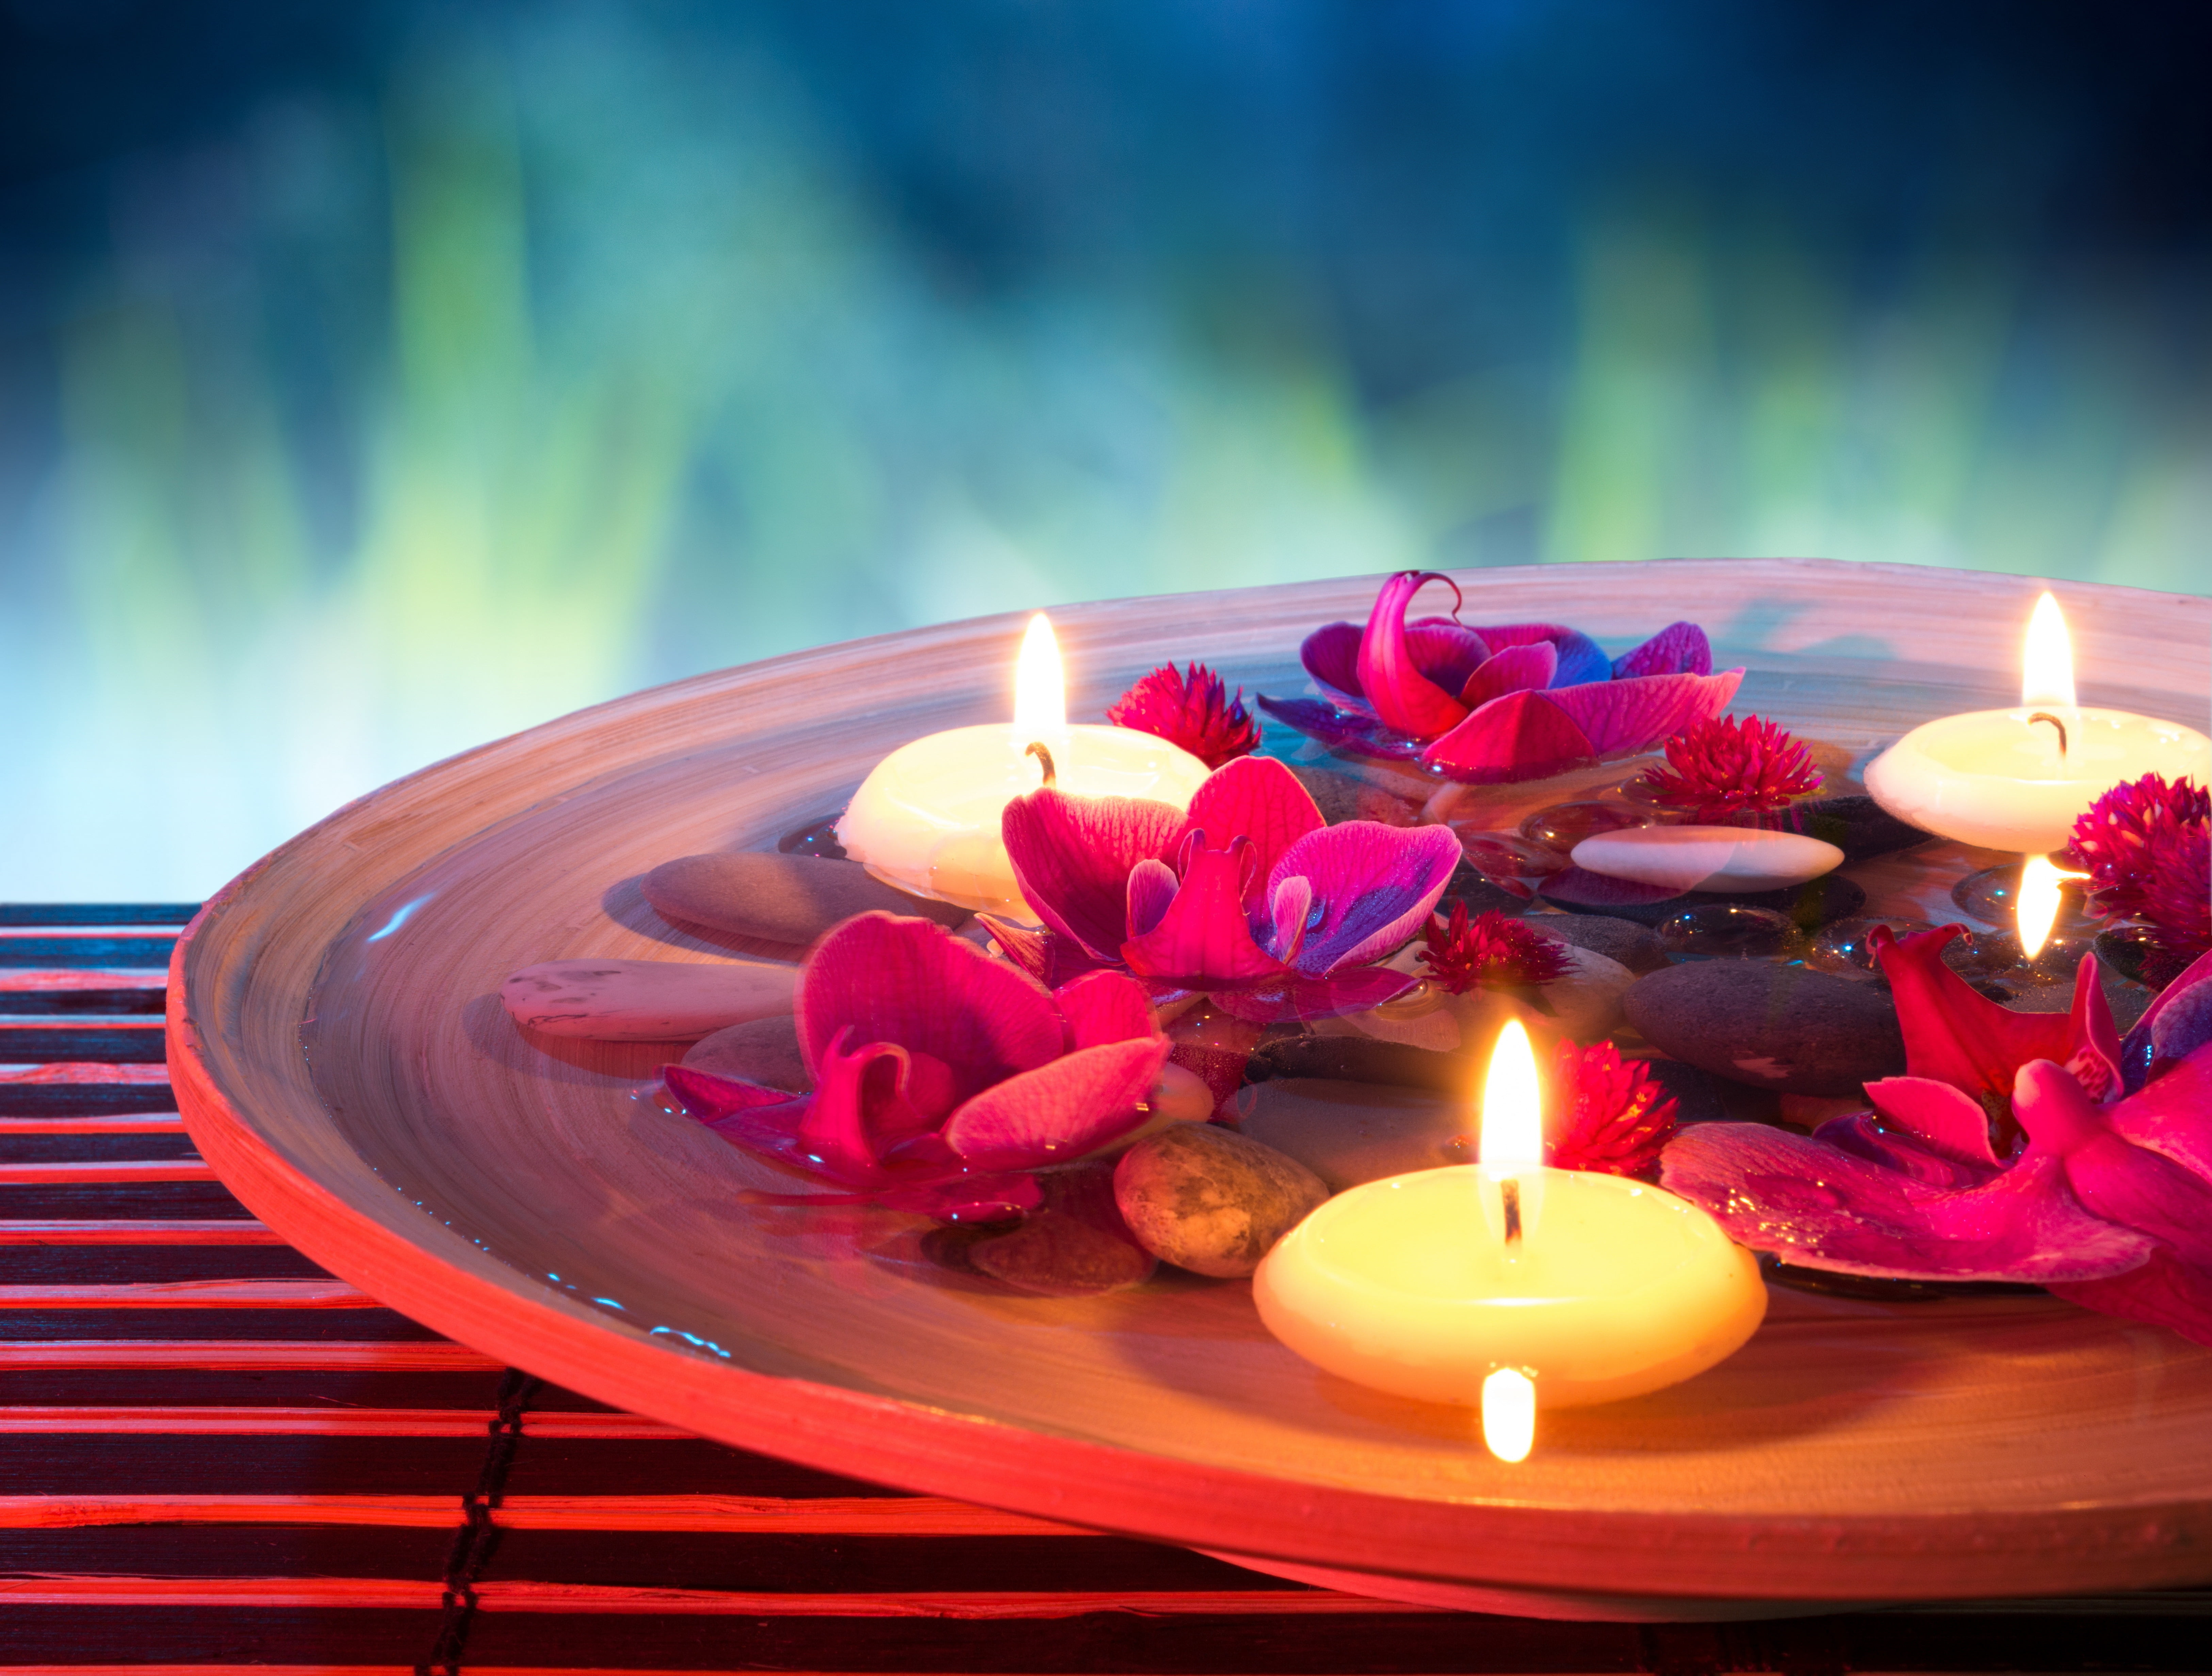 red flowers and white tealight candles, water, orchids, Spa, Spa stones